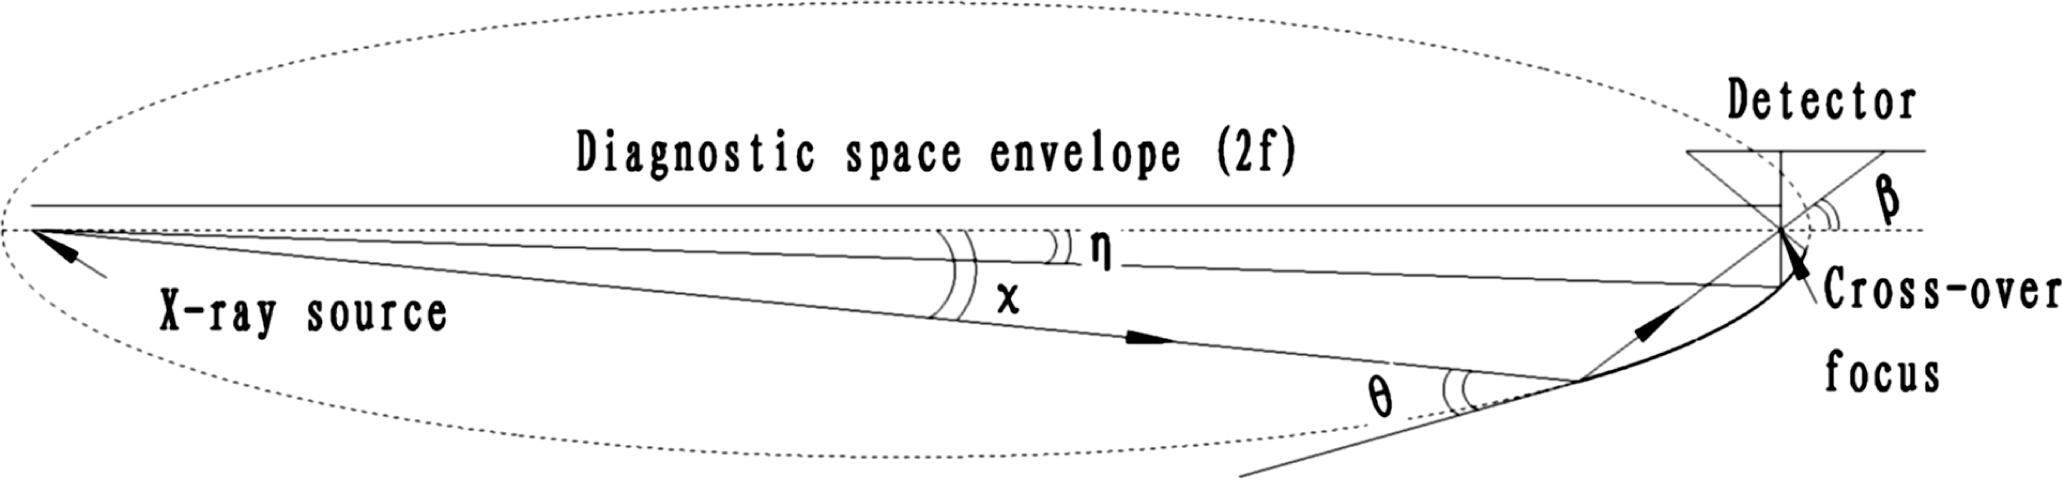 Schematic of the locations of the elliptical crystal segment and detector surface relative to the X-ray source and diagnostic space. The optimized parameters are $\unicode[STIX]{x1D700}=0.9677$, $2f=600$ mm and $\unicode[STIX]{x1D702}=1.8759^{\circ }$. $\unicode[STIX]{x1D712}$ is measured from the ellipse semi-major axis to the initial X-ray trace, $\unicode[STIX]{x1D703}$ is the Bragg angle, and $\unicode[STIX]{x1D6FD}$ is the angle of the X-ray through the crossover focus.